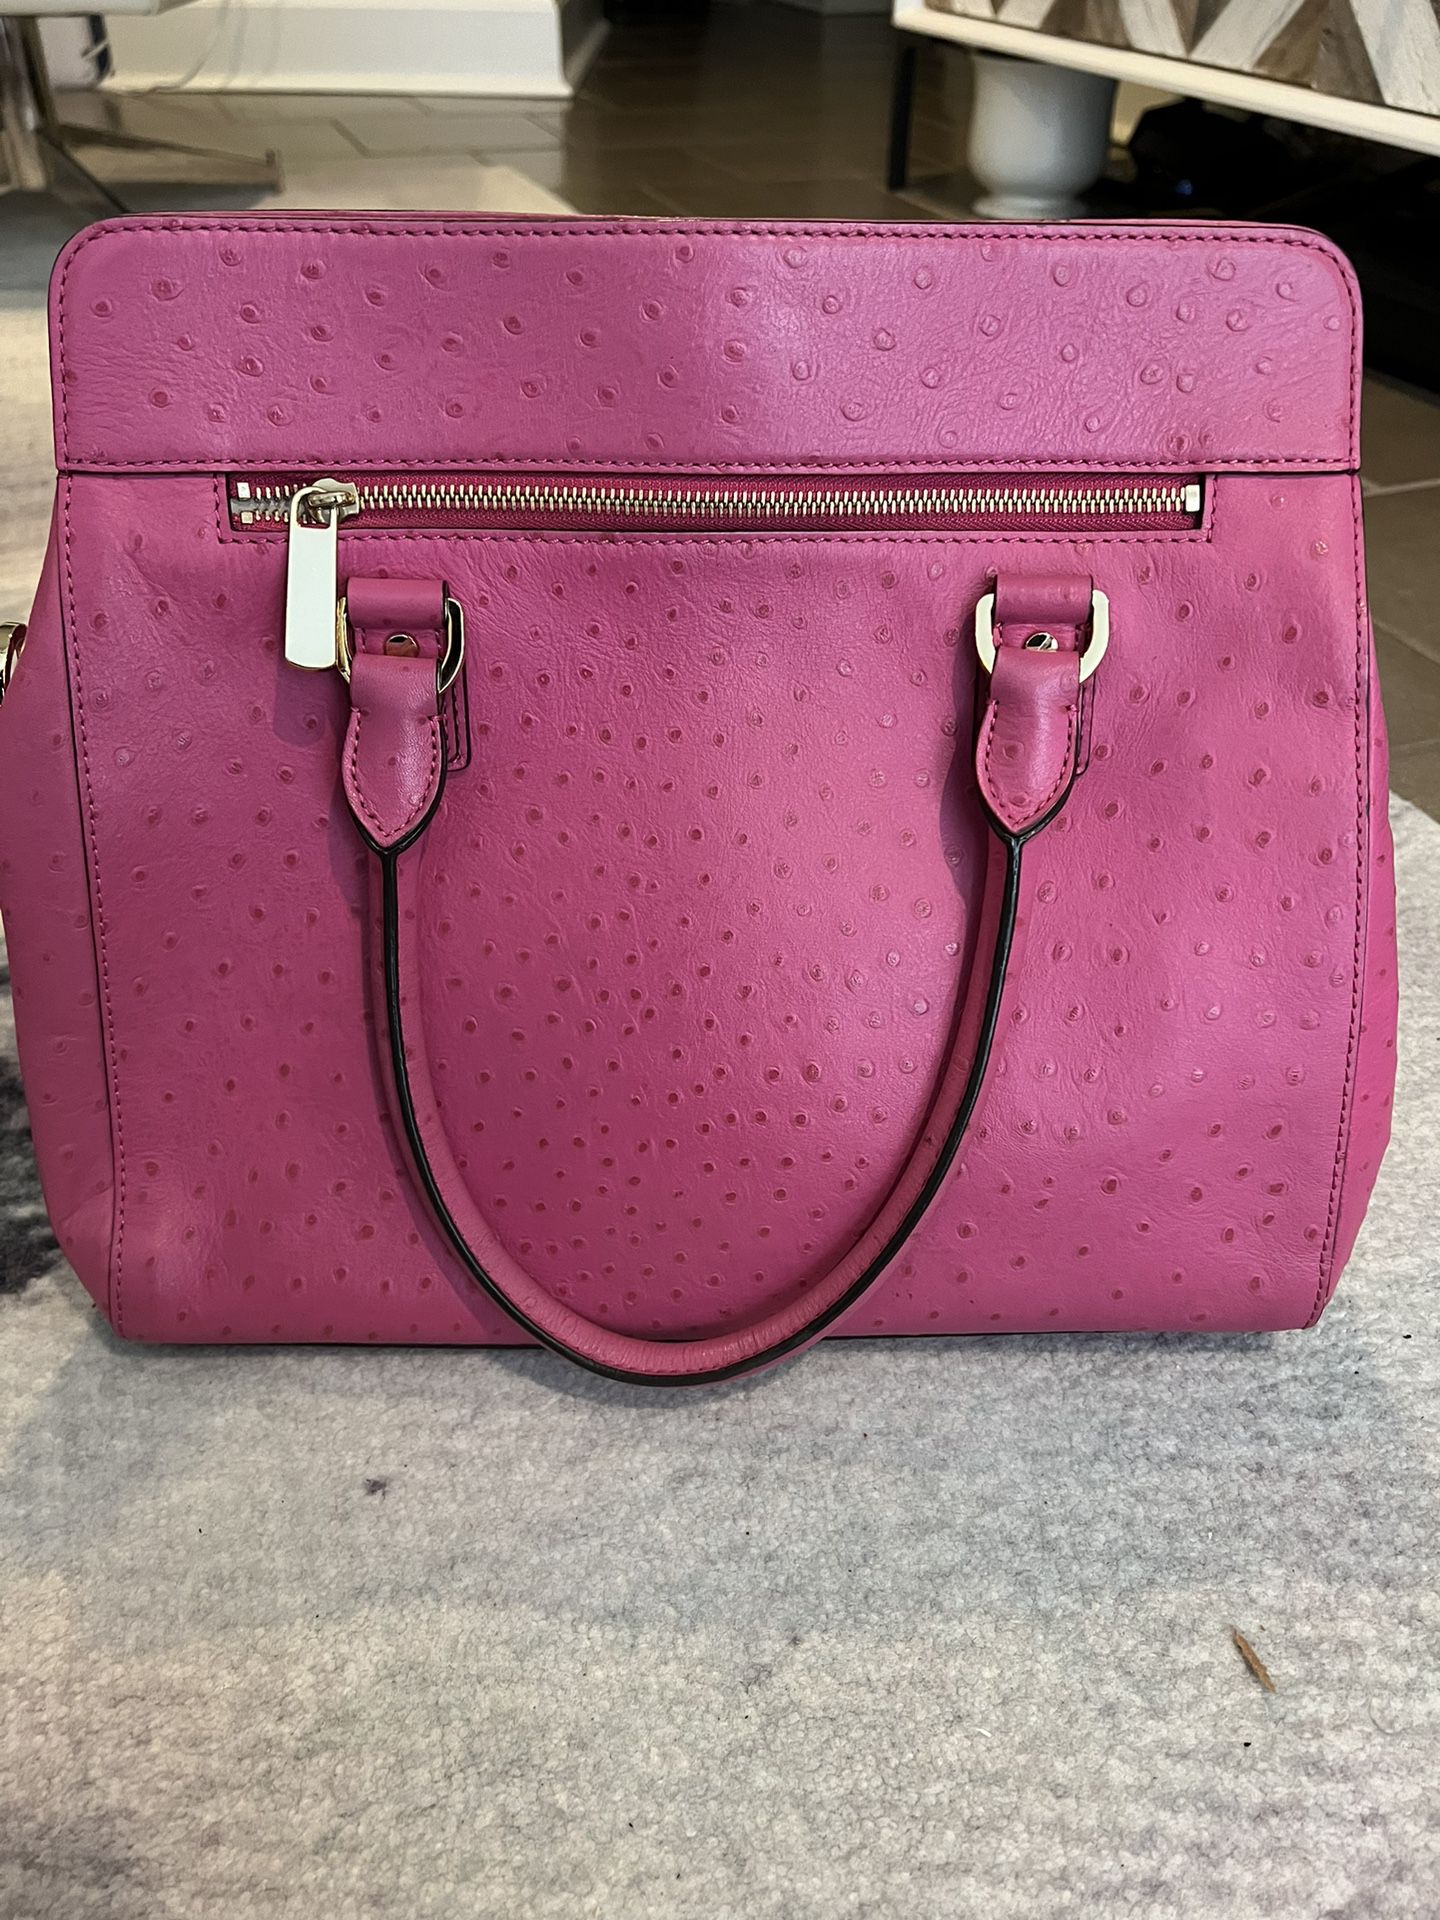 Pink Ostrich Skin Purse for Sale in Ft Sm Houston, TX - OfferUp